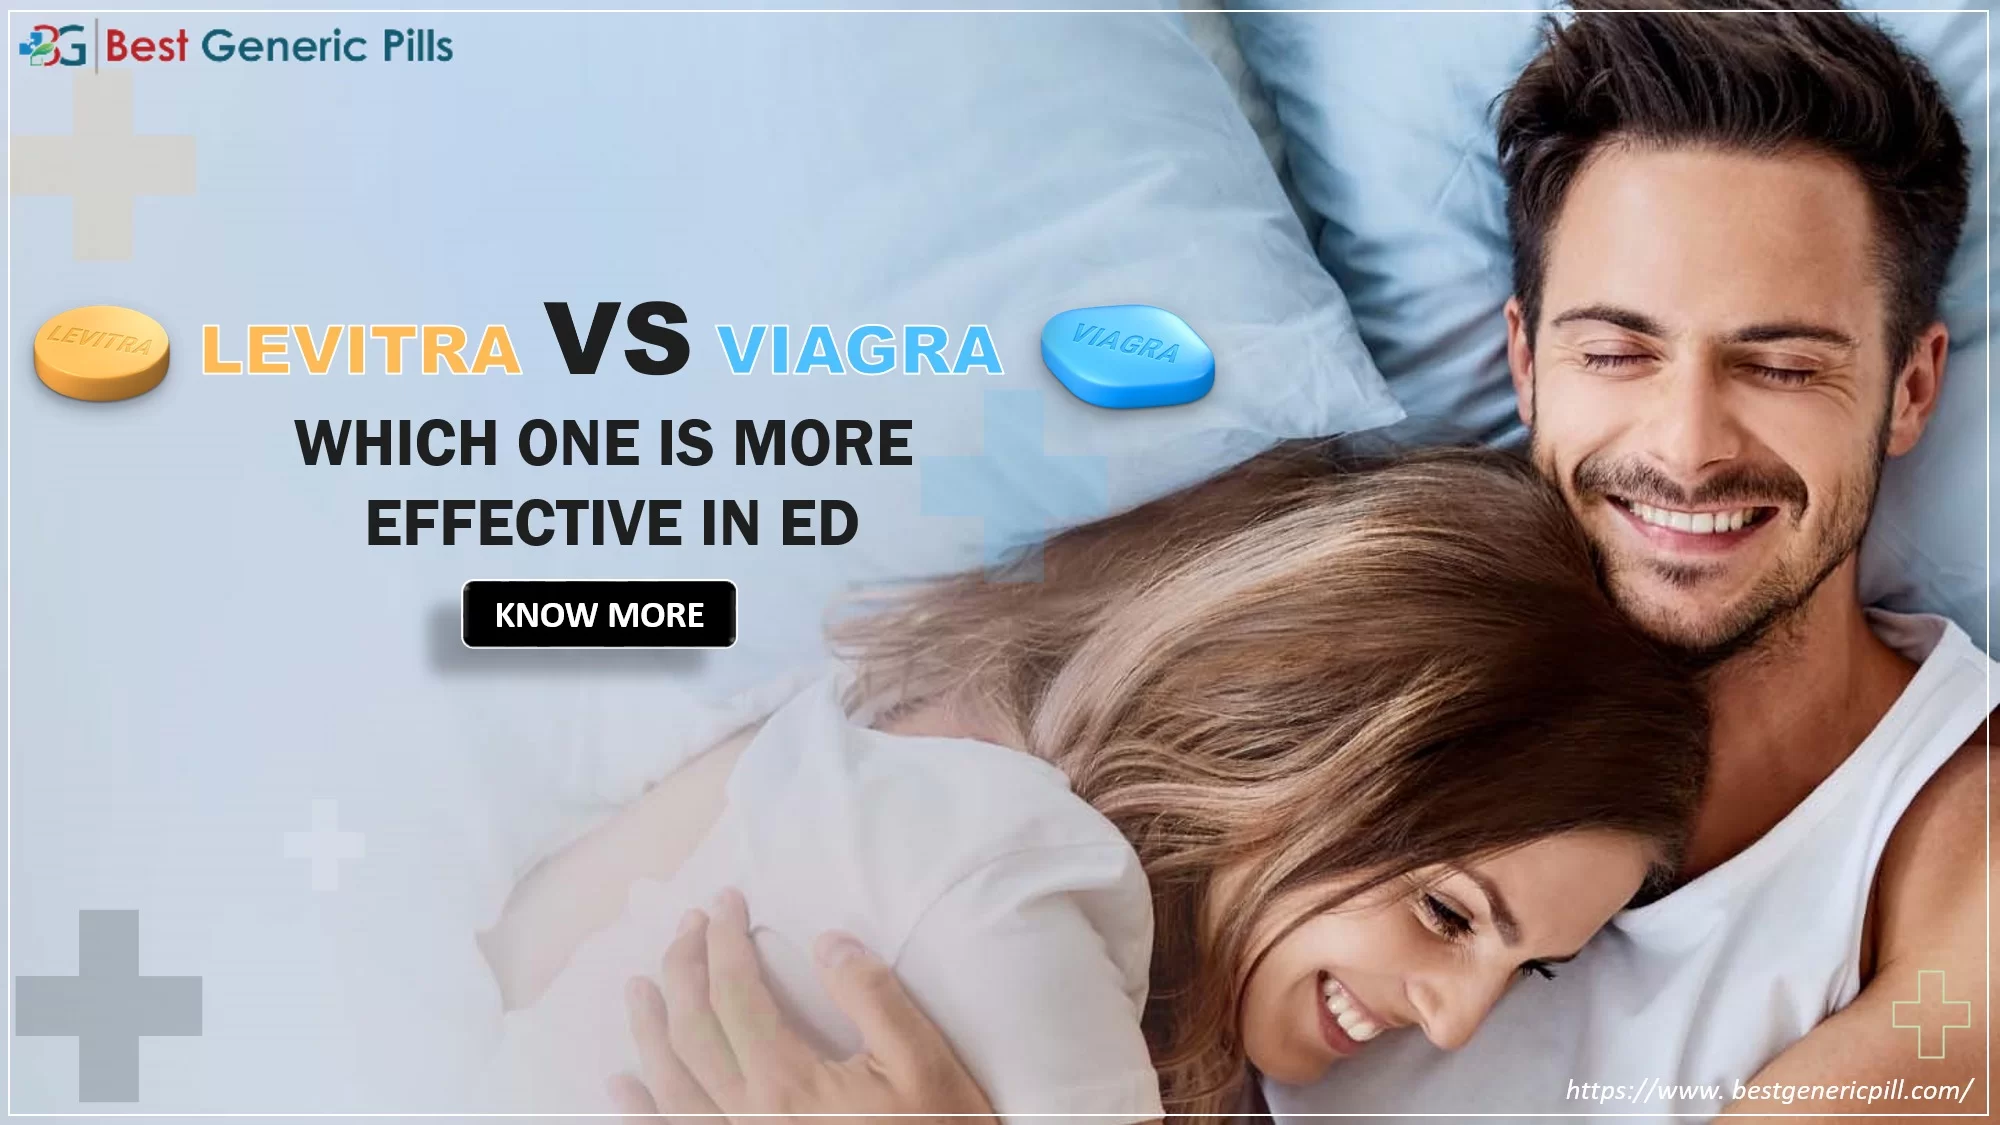 Levitra Vs Viagra: Which One is more effective in ED